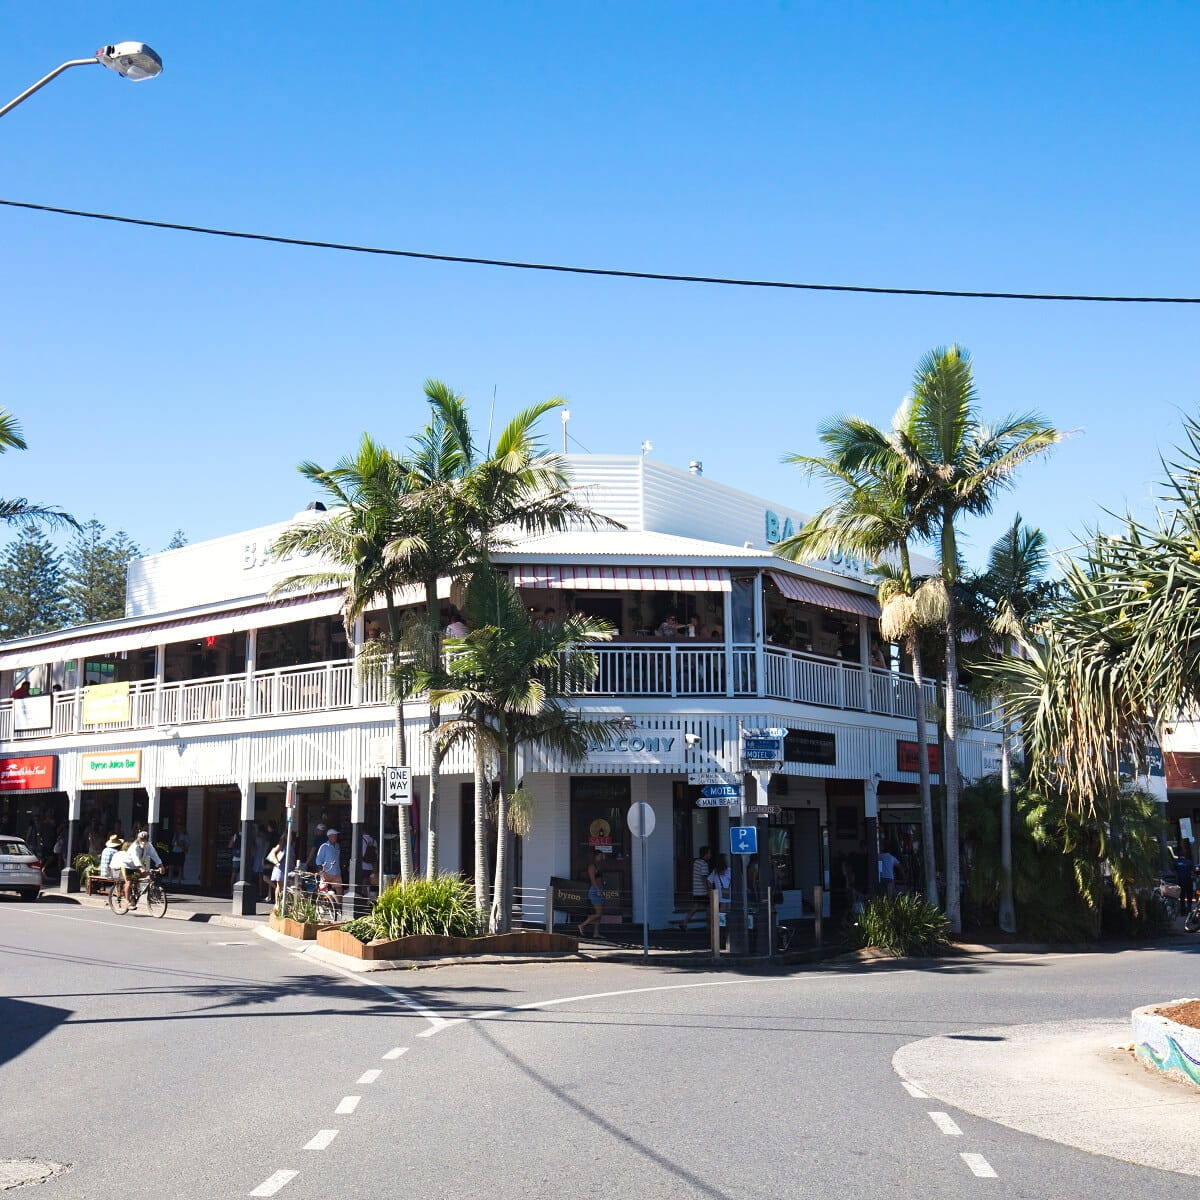 The streets of Byron Bay